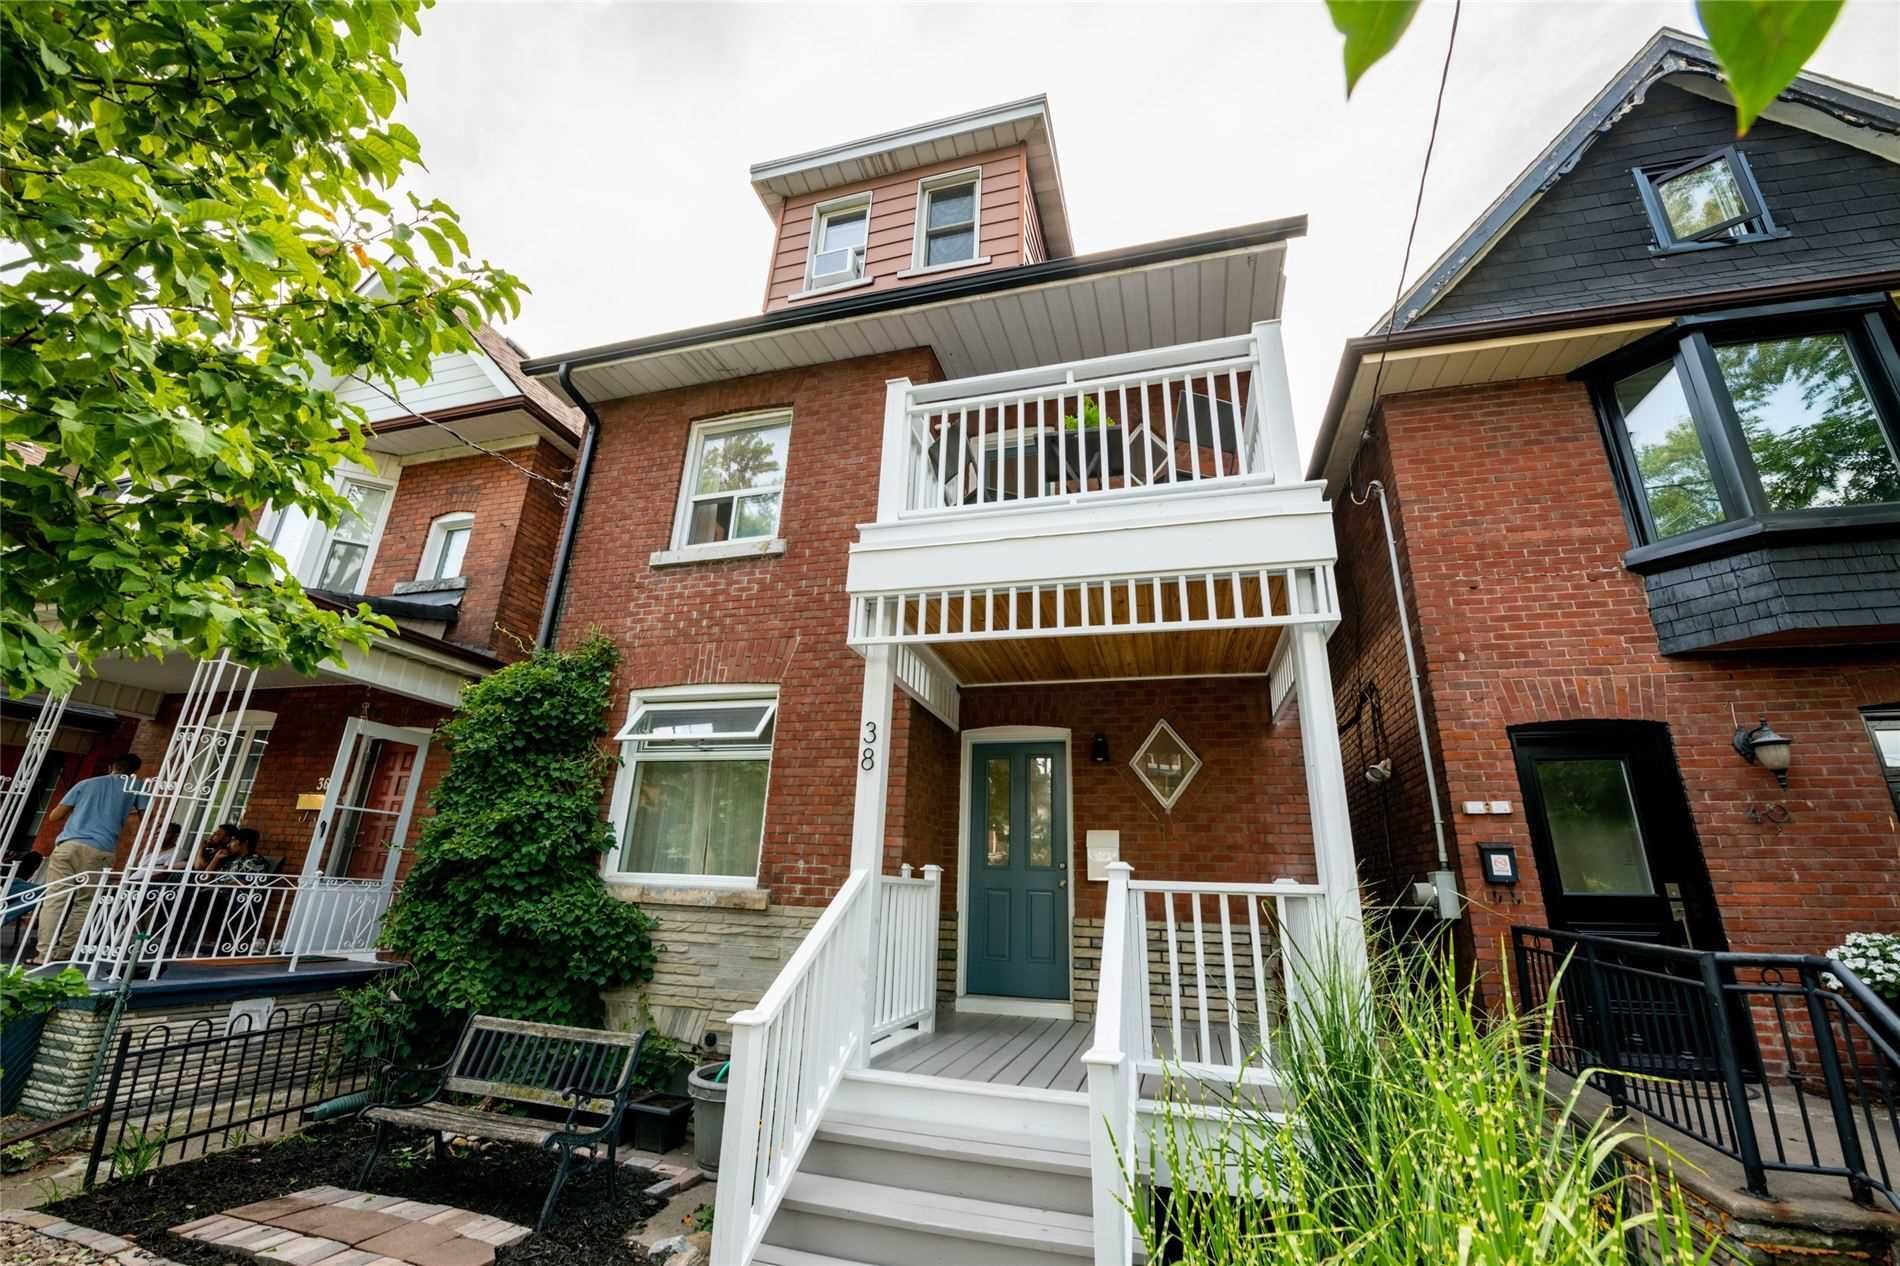 Main Photo: 38 Emerson Avenue in Toronto: Dovercourt-Wallace Emerson-Junction House (2 1/2 Storey) for sale (Toronto W02)  : MLS®# W5740493